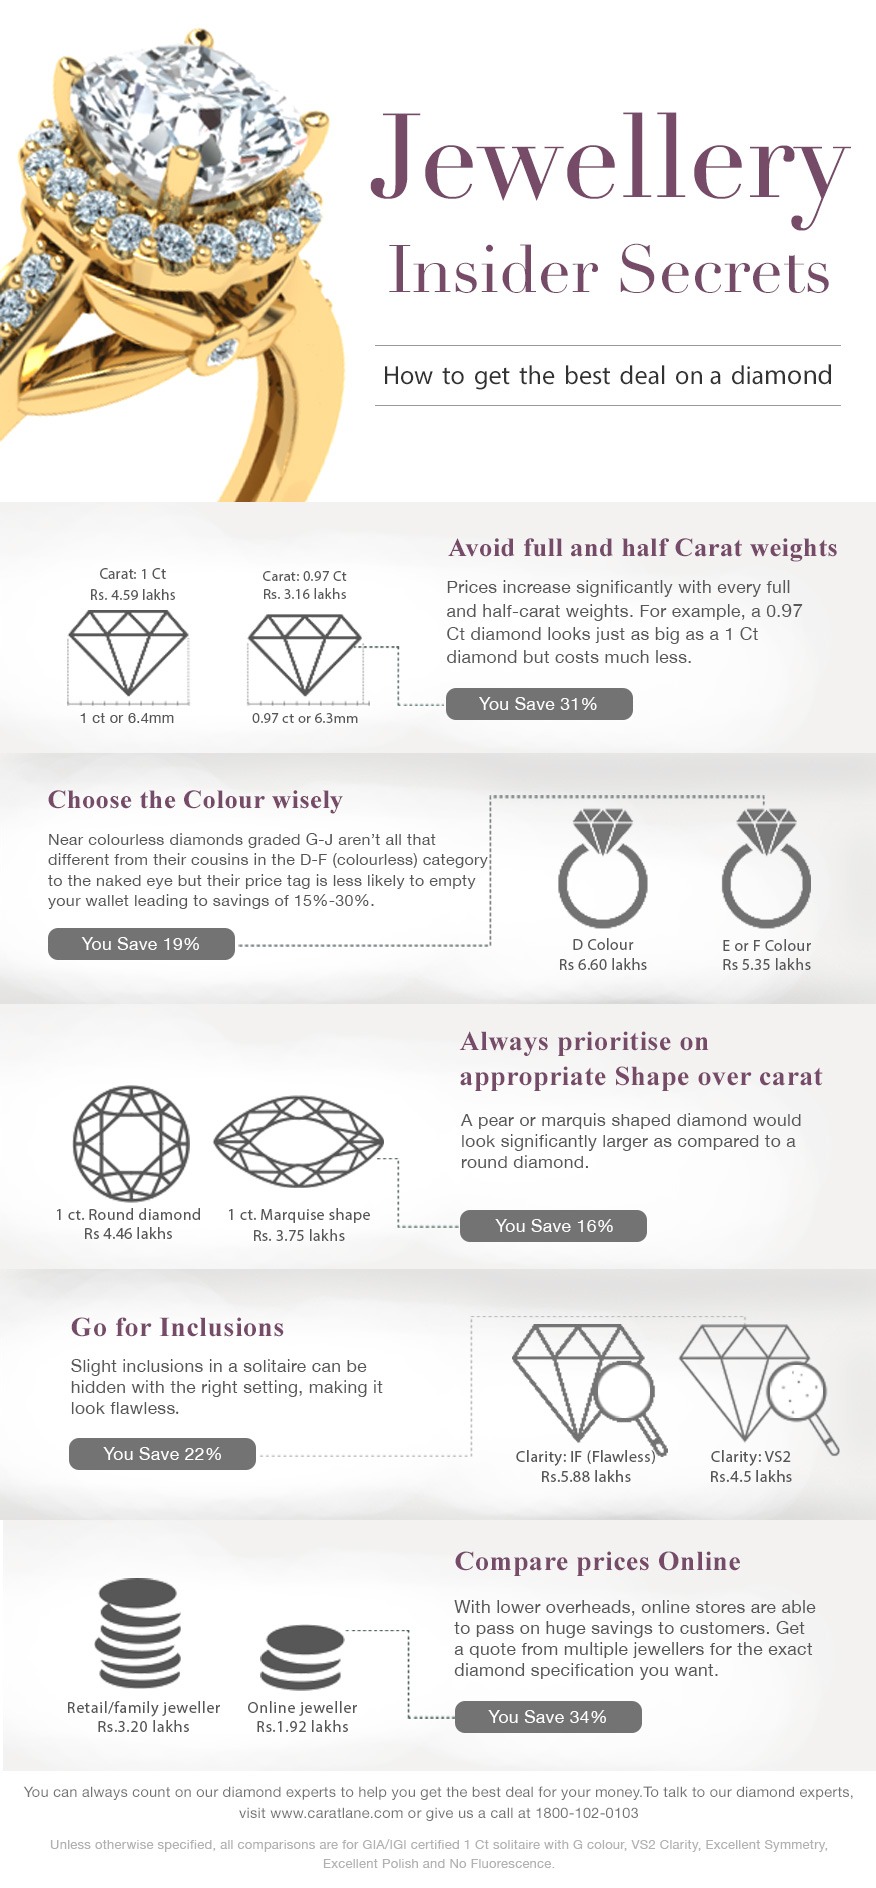 Jewellery Insider Secrets: How to get the best deal on a diamond